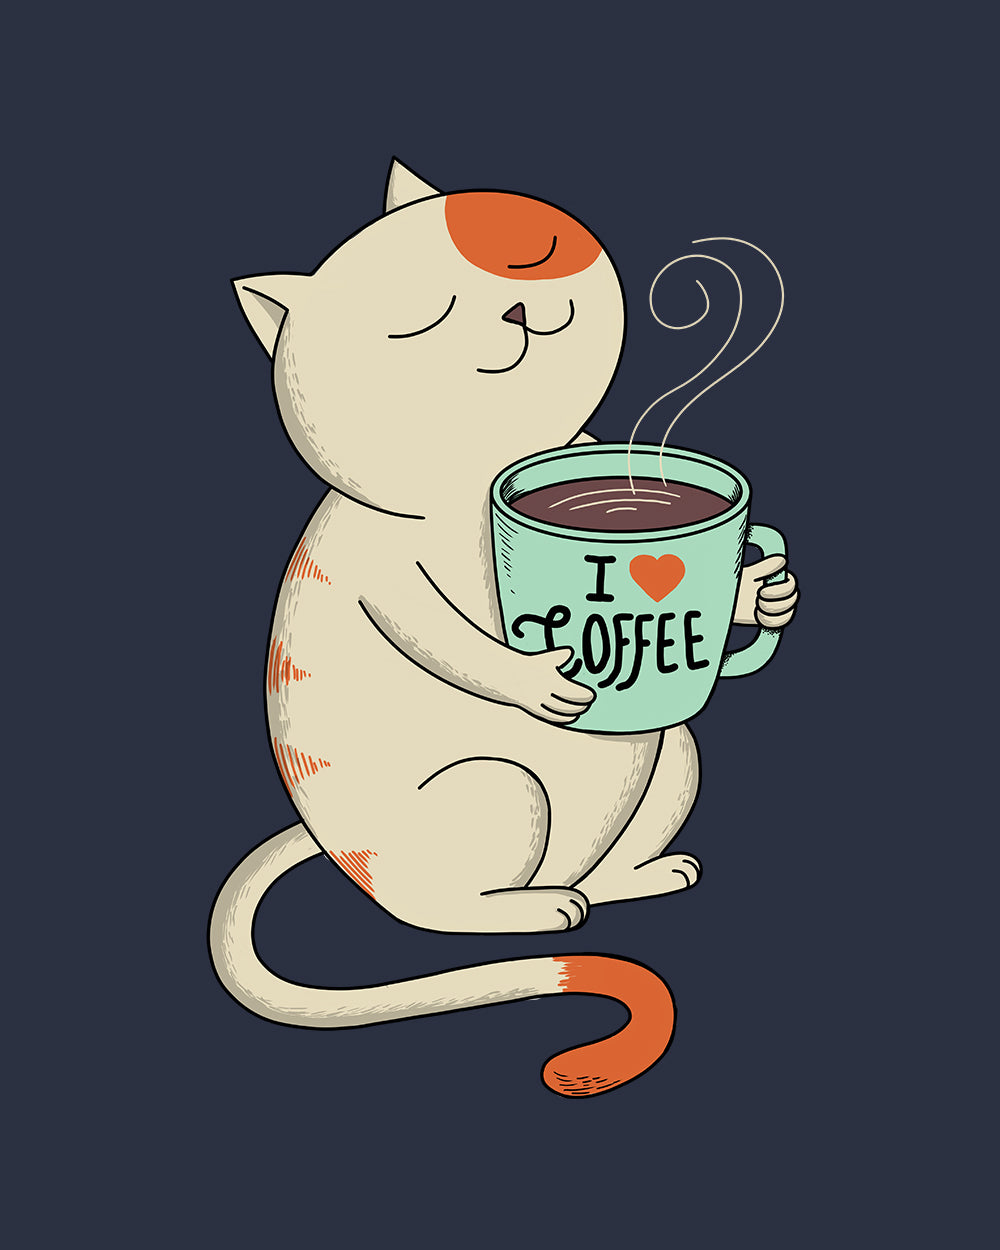 Cat and Coffee T-Shirt Australia Online #colour_navy